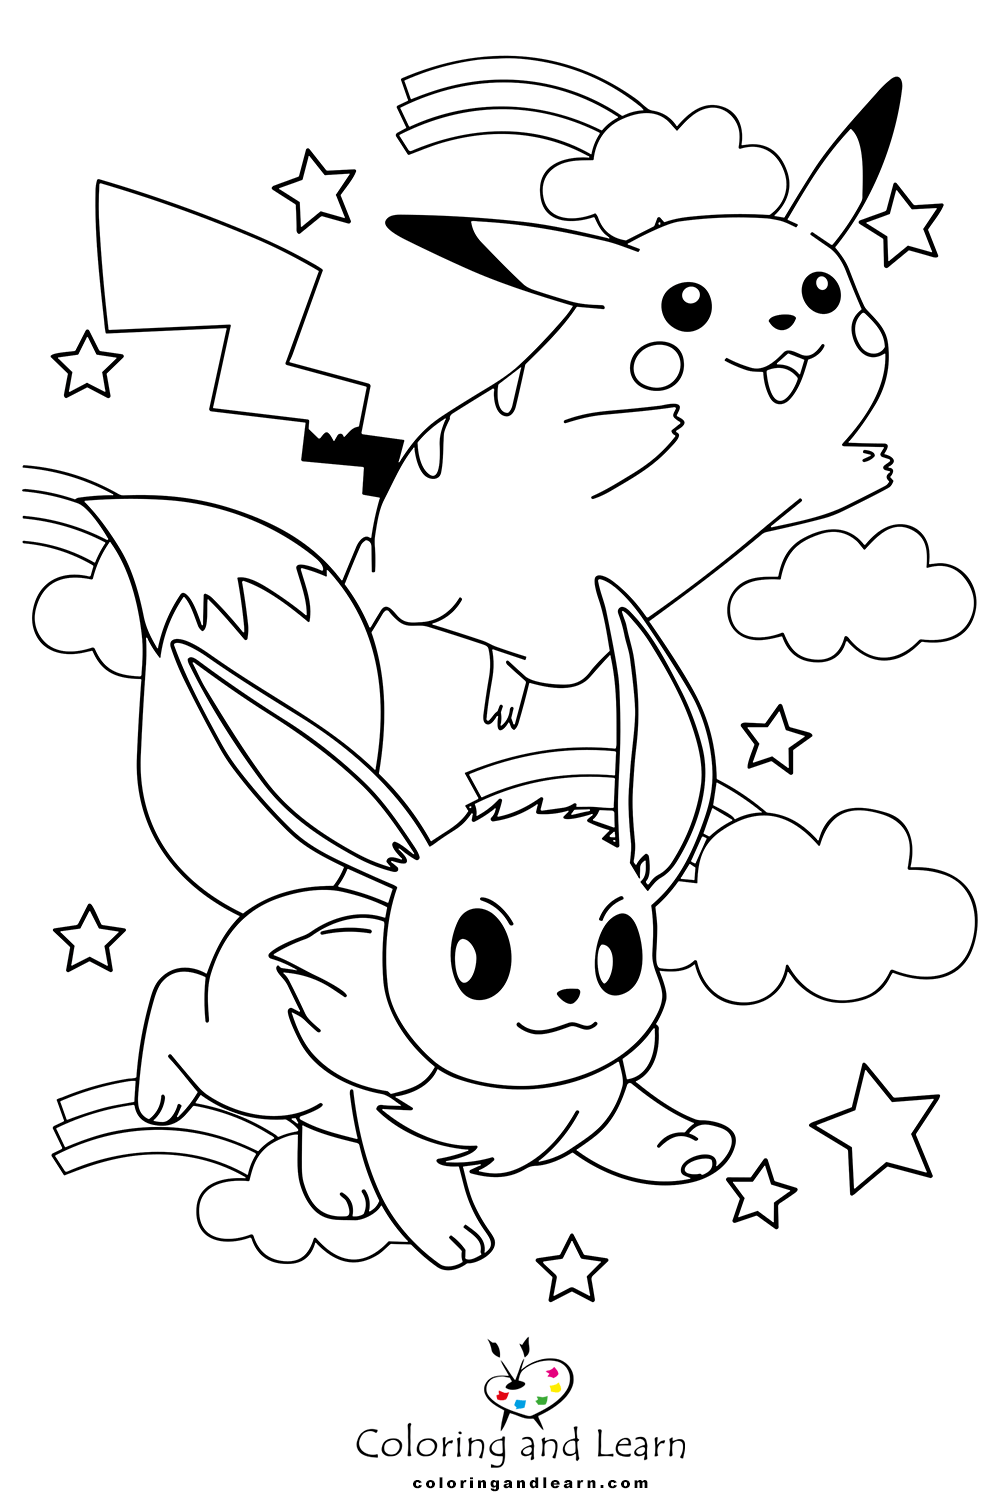 200 Eevee Coloring Pages: Evolve Your Art Skills 142